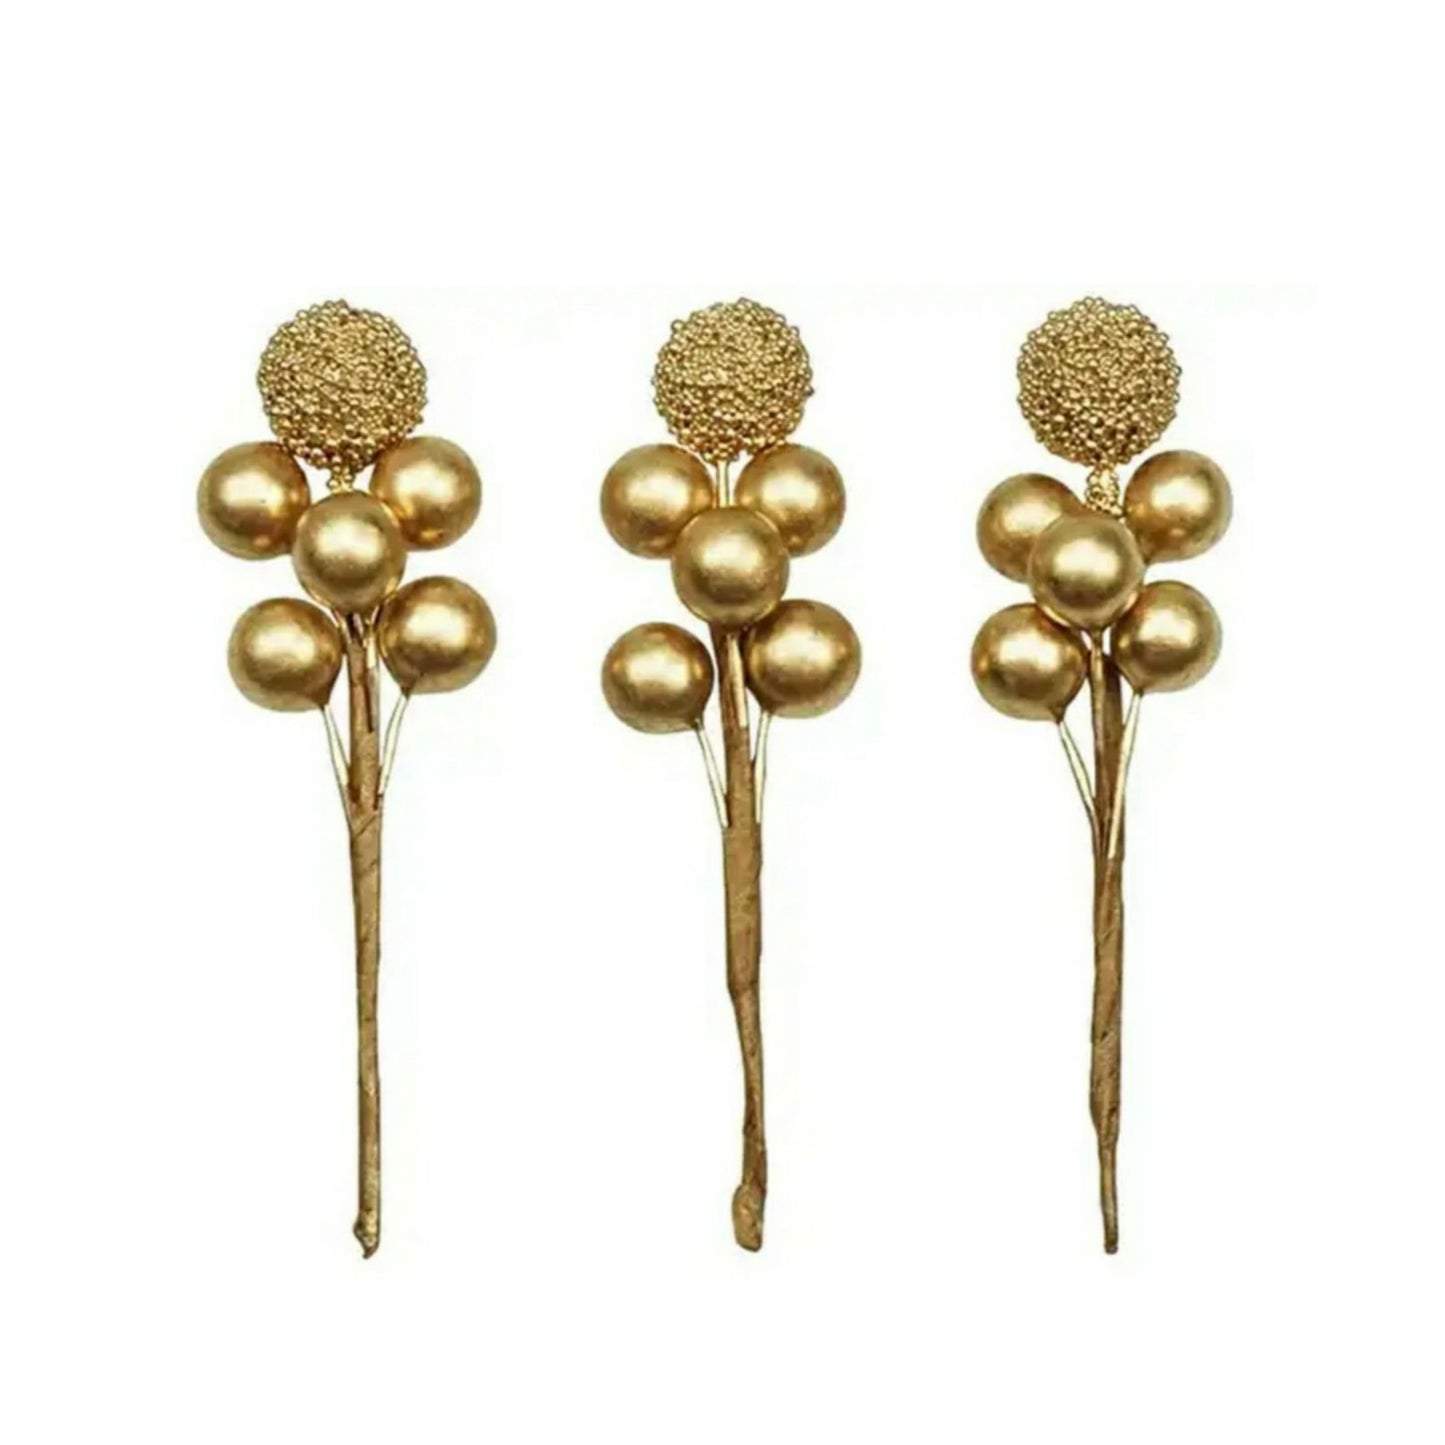 Gold Big Pearl Gift Buds 
Pack of - 3